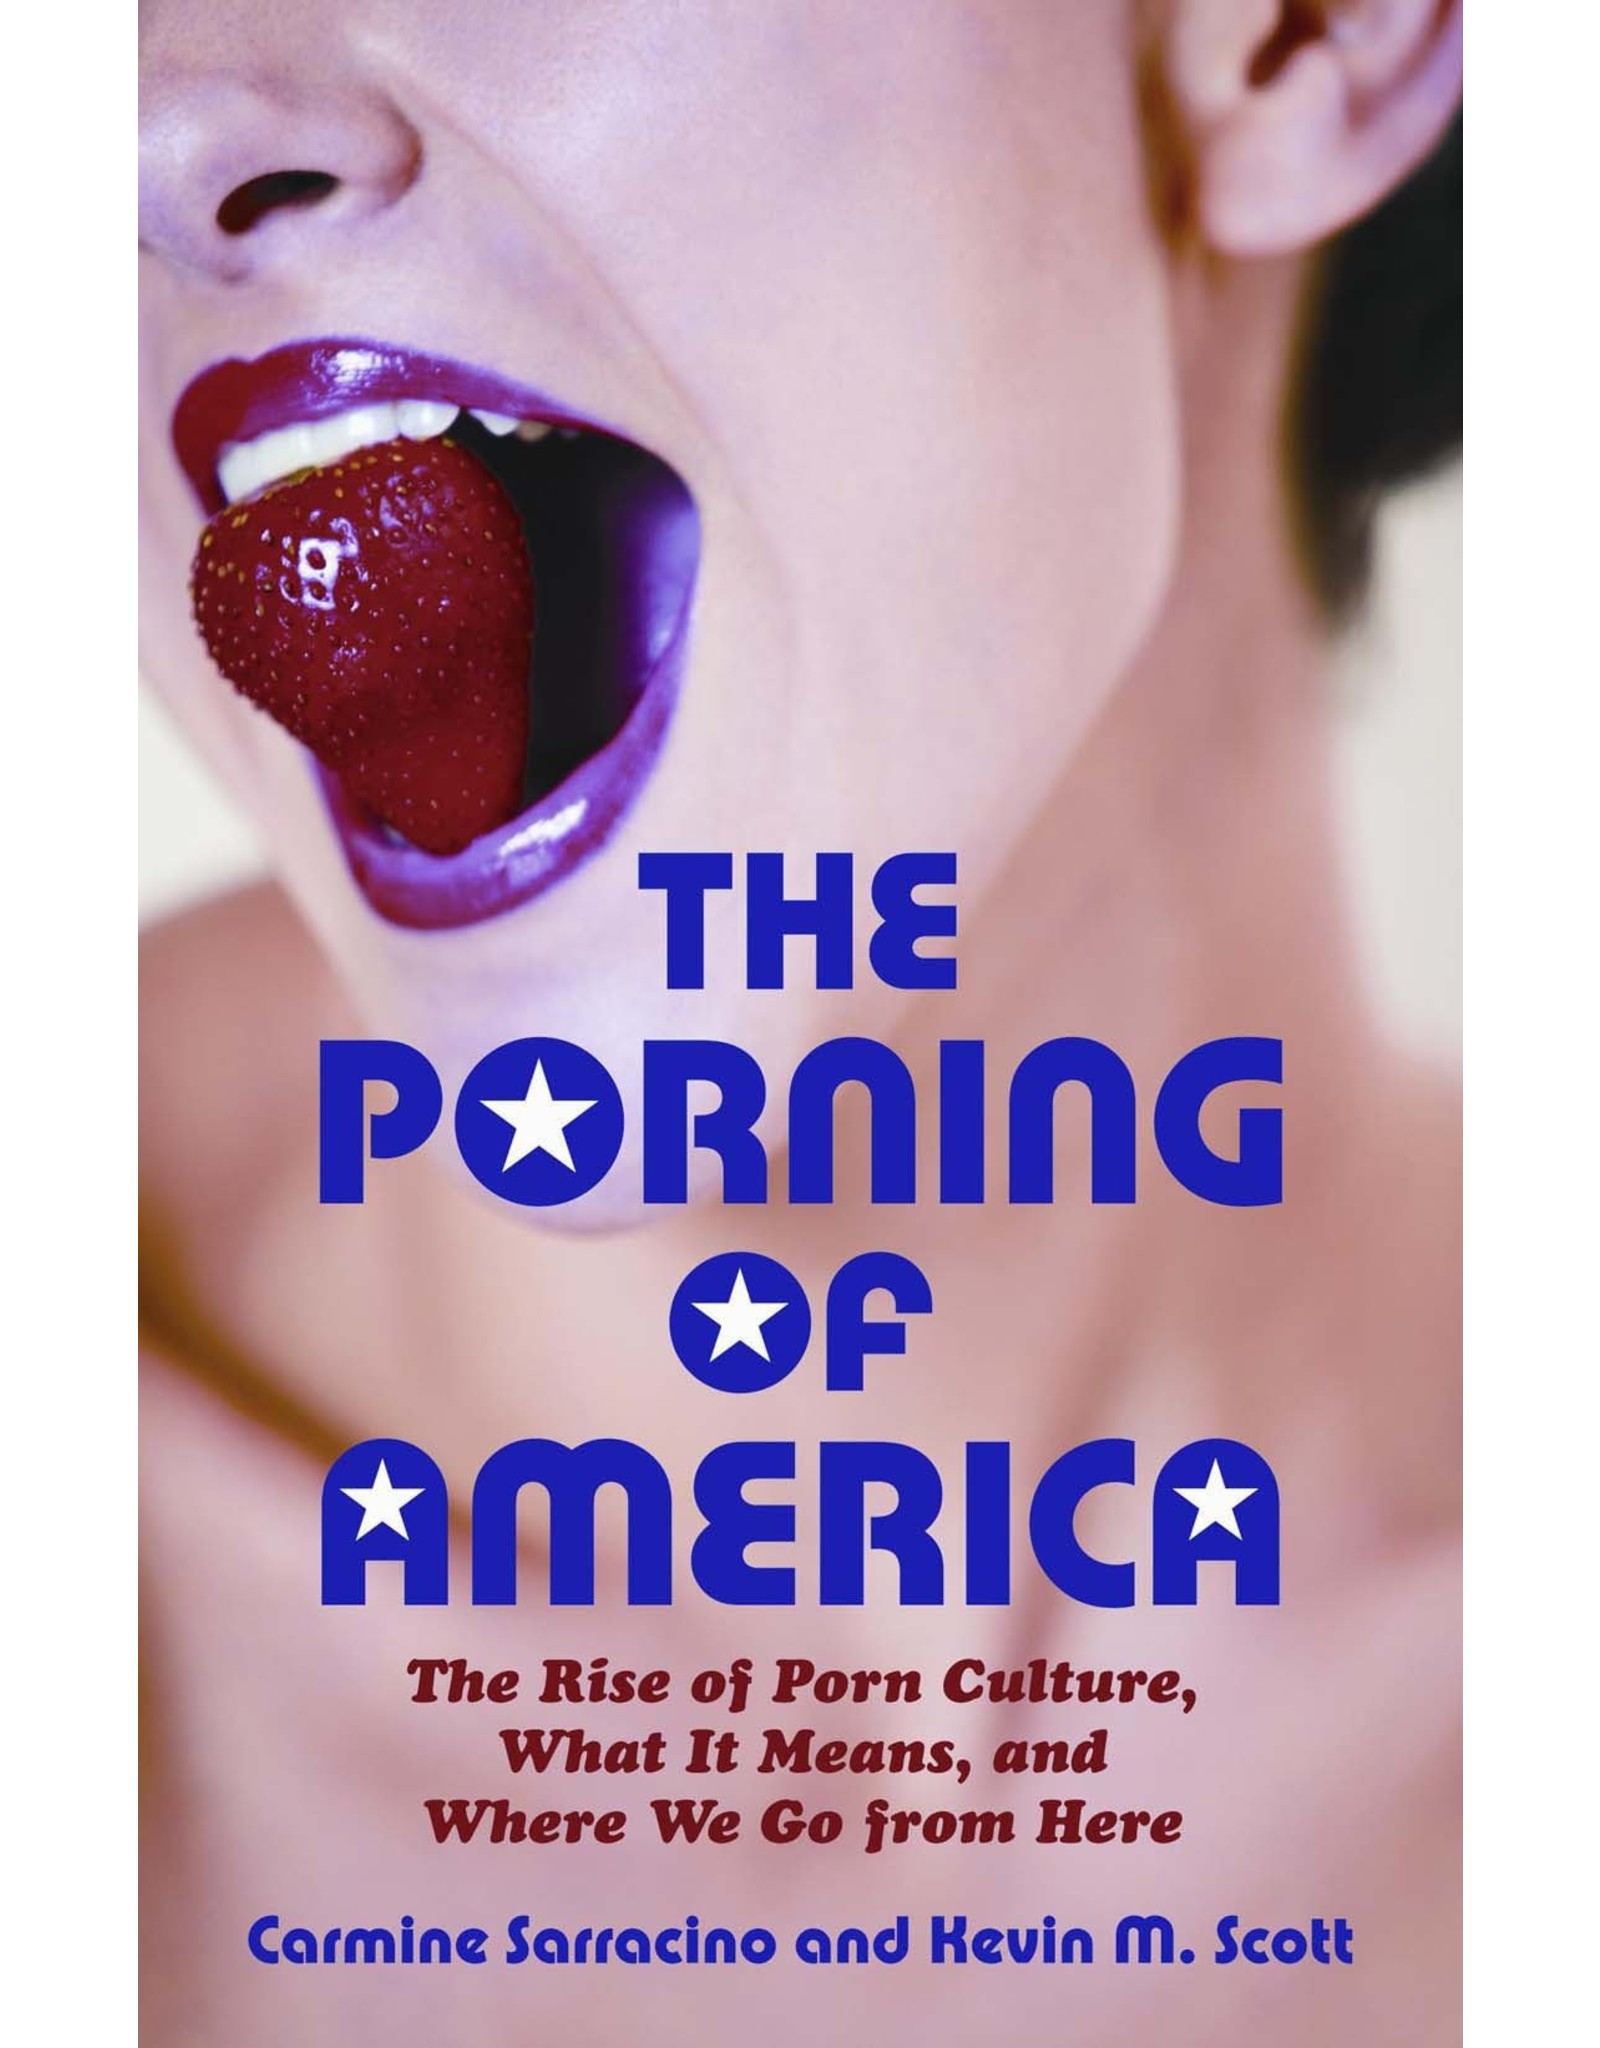 Literature The Porning of America: The Rise of Porn-Culture, What it Means, and Where We Go from Here